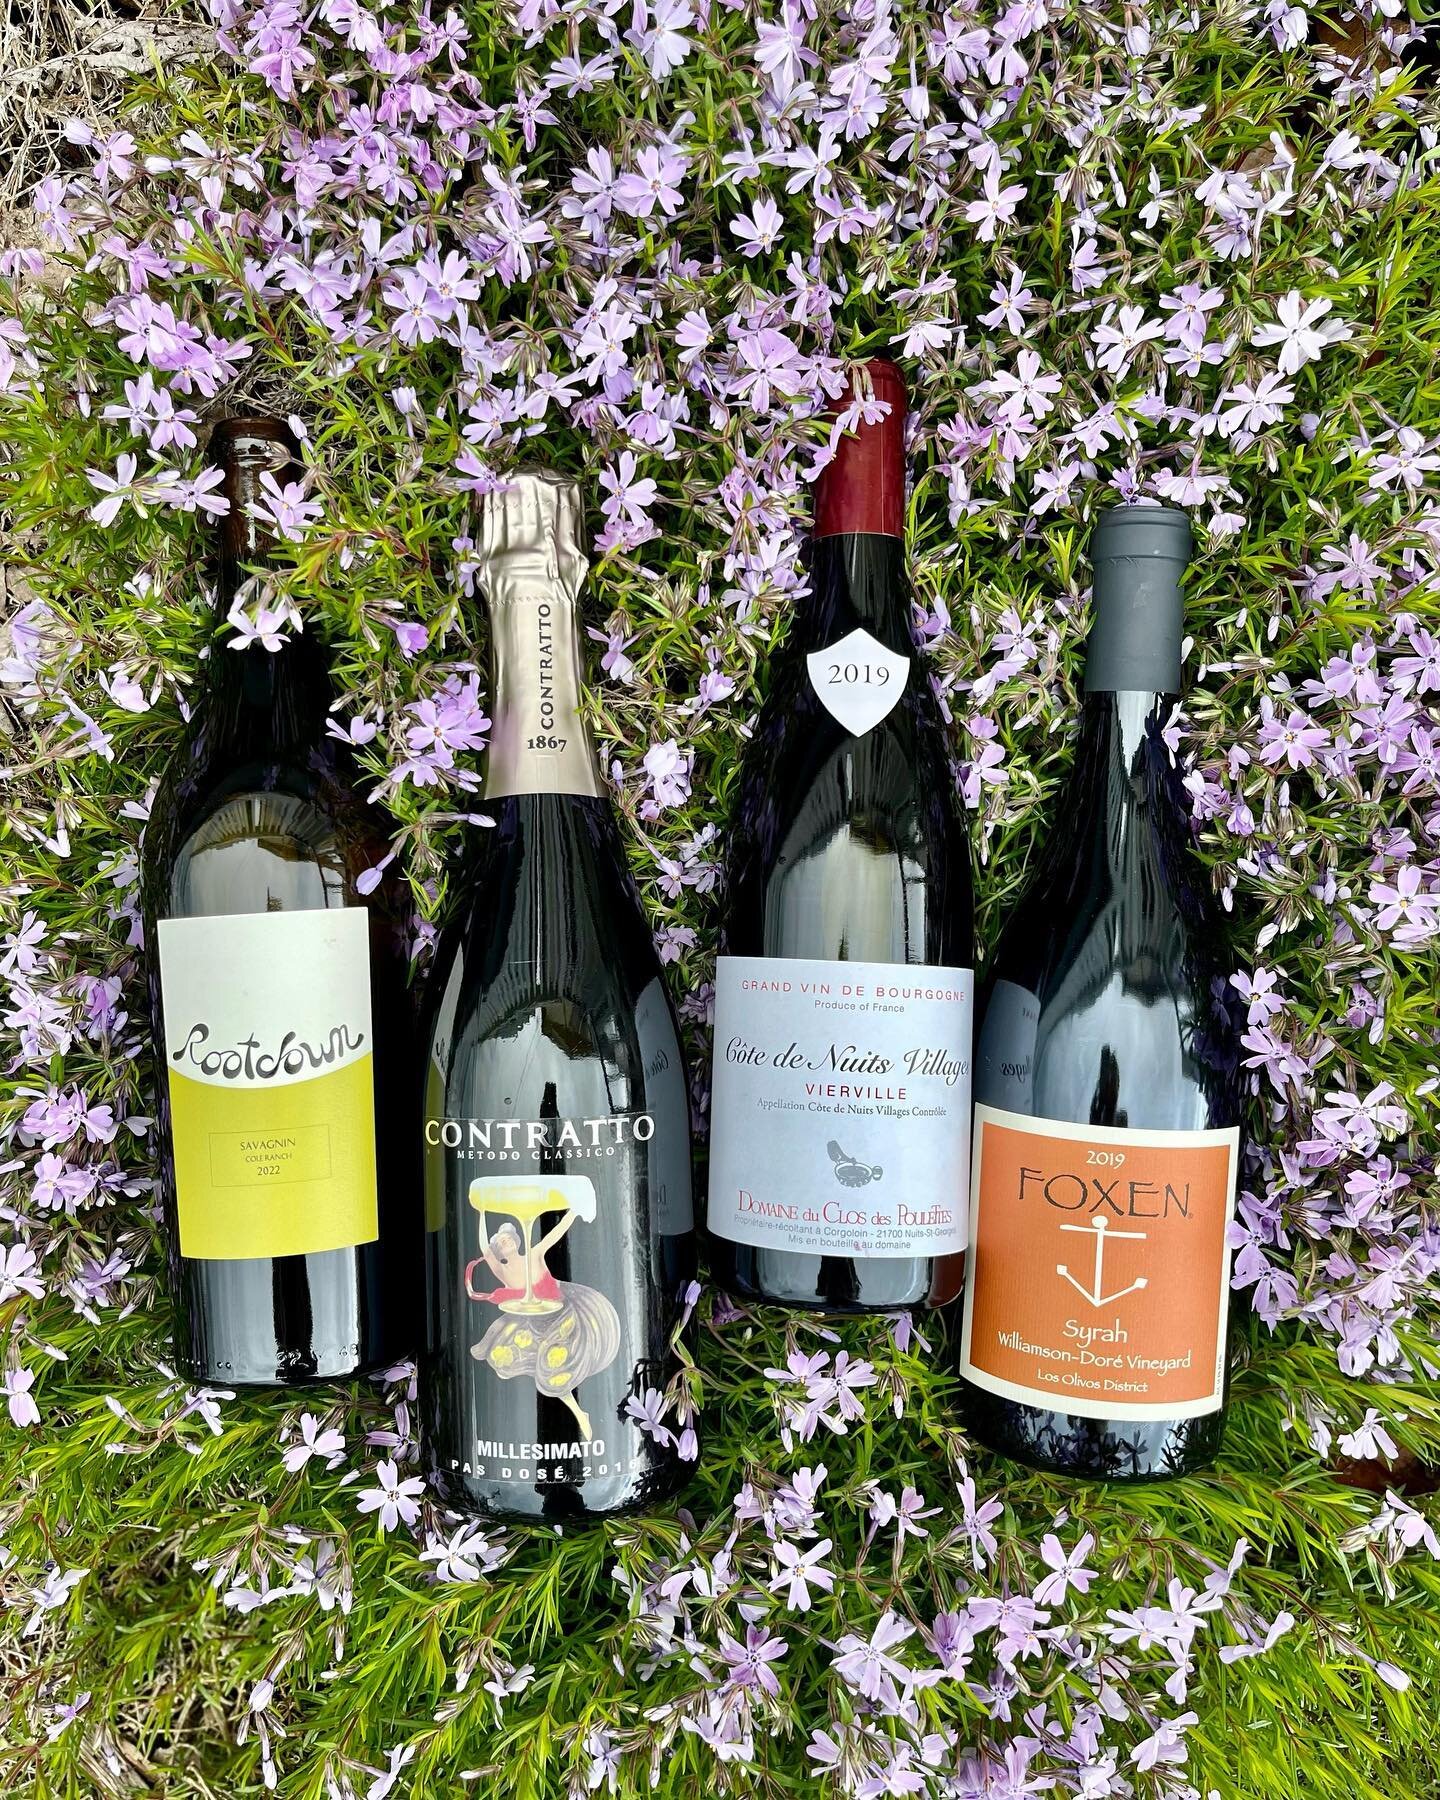 There&rsquo;s still a few seats left for our First Saturday tasting with Mark Longsworth! Here&rsquo;s a sneak peak at what we&rsquo;ll be pouring as we get ready for the warm weather ahead ☀️